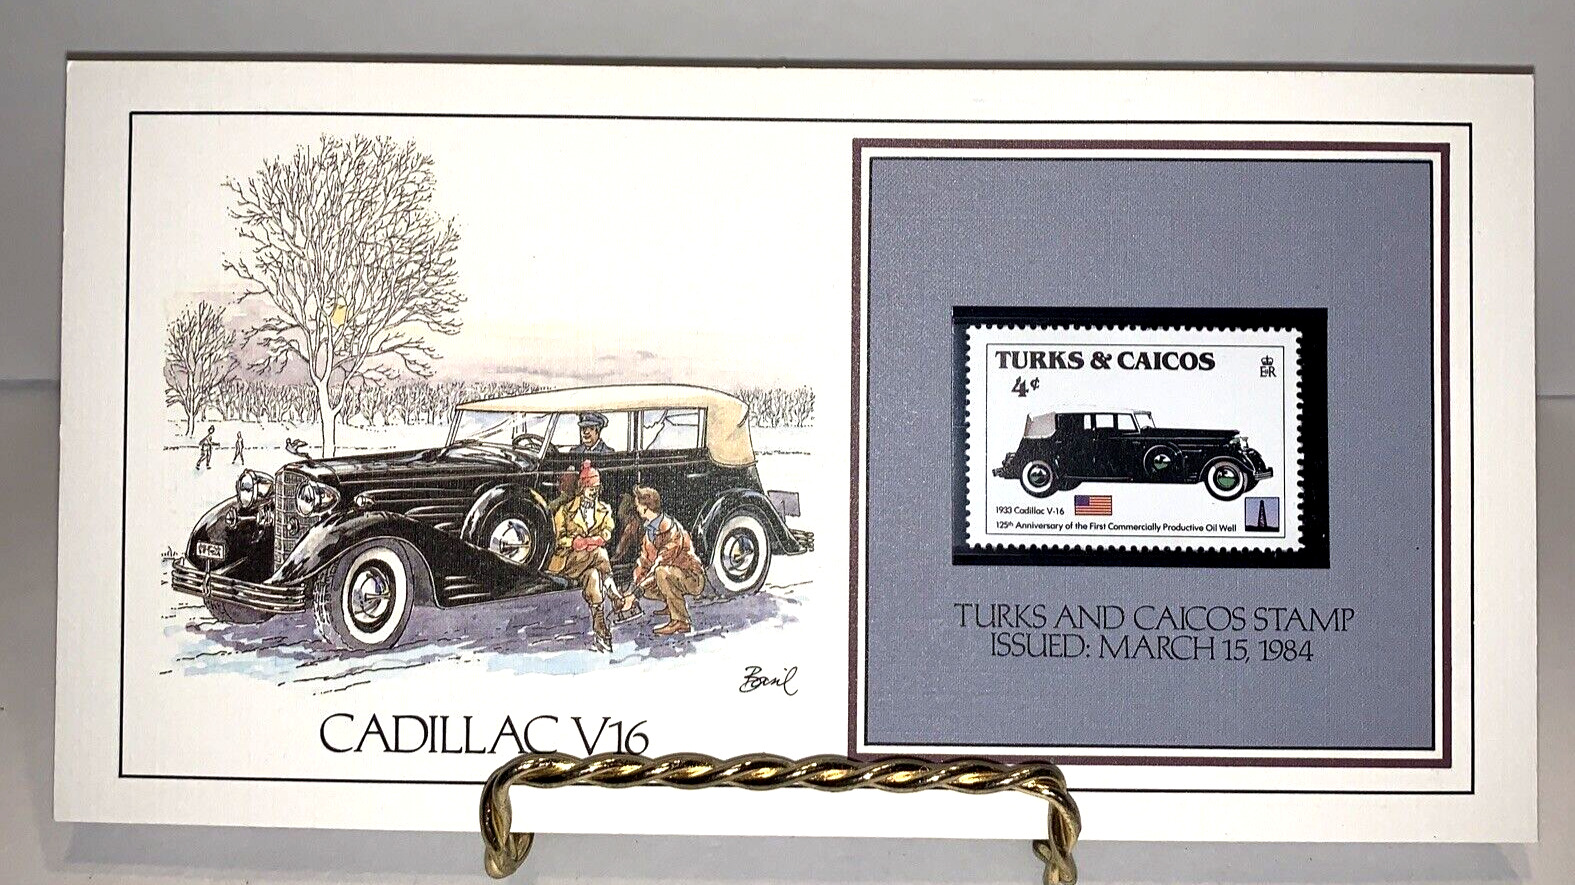 Cadillac V16 Turk &caicos Stamp Issued March 15 1984 4cents